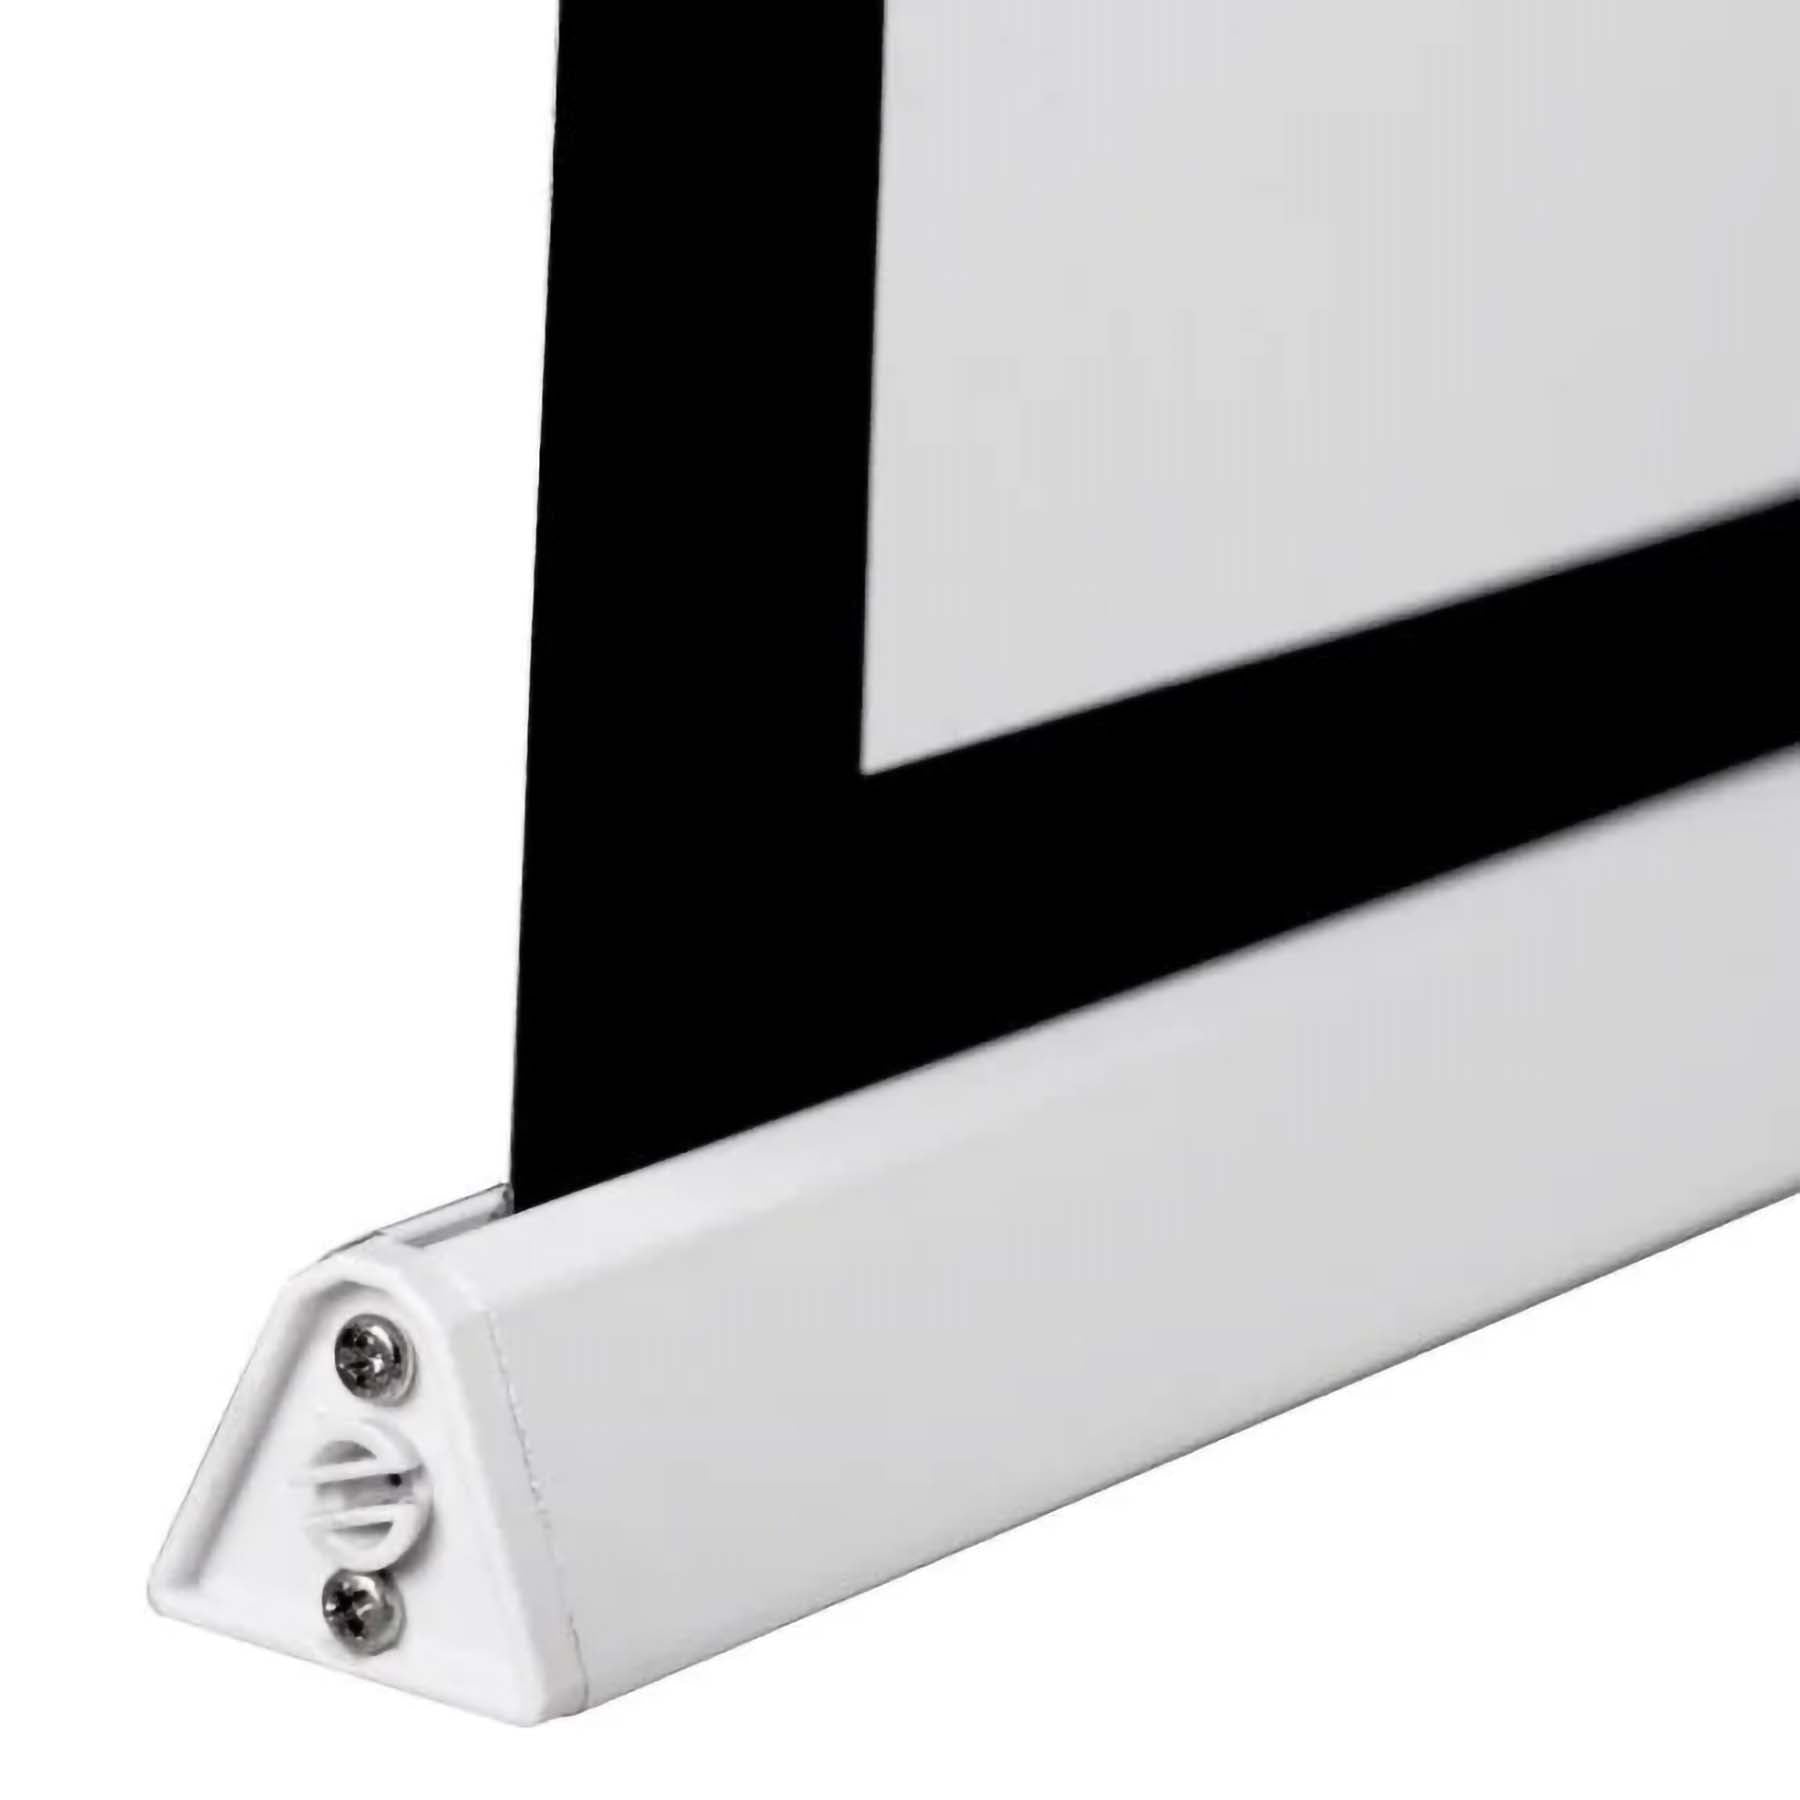 Encore Screens 16:9 CineMotion Stealth - Motorised In Ceiling with RF & Wall Control